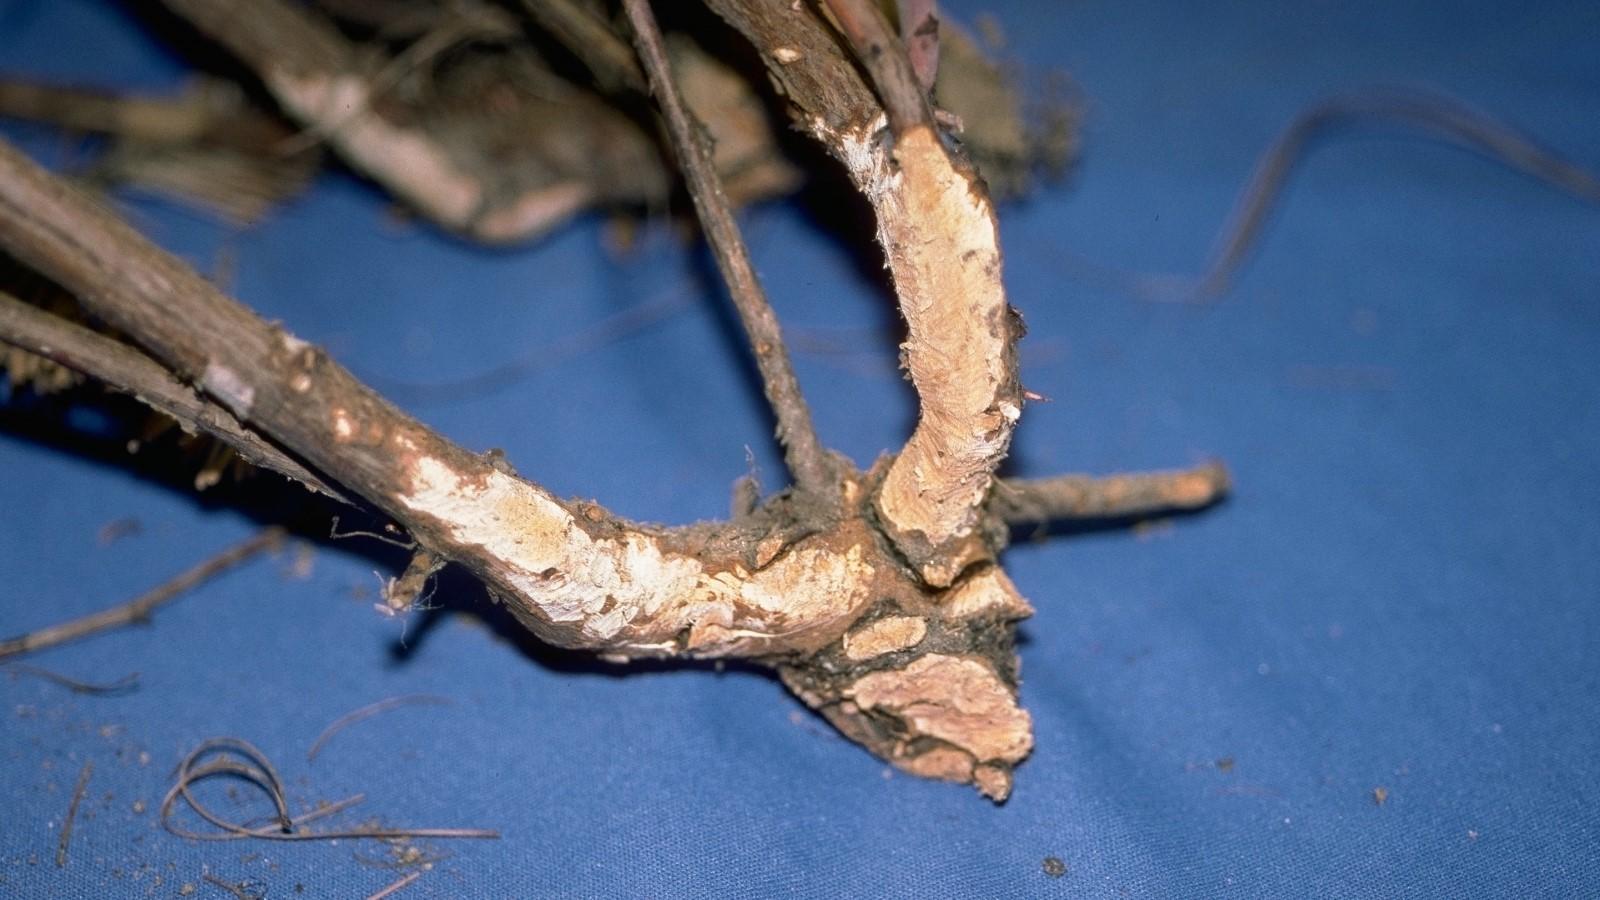 Bark damage from vole chewing on lower shrub branches